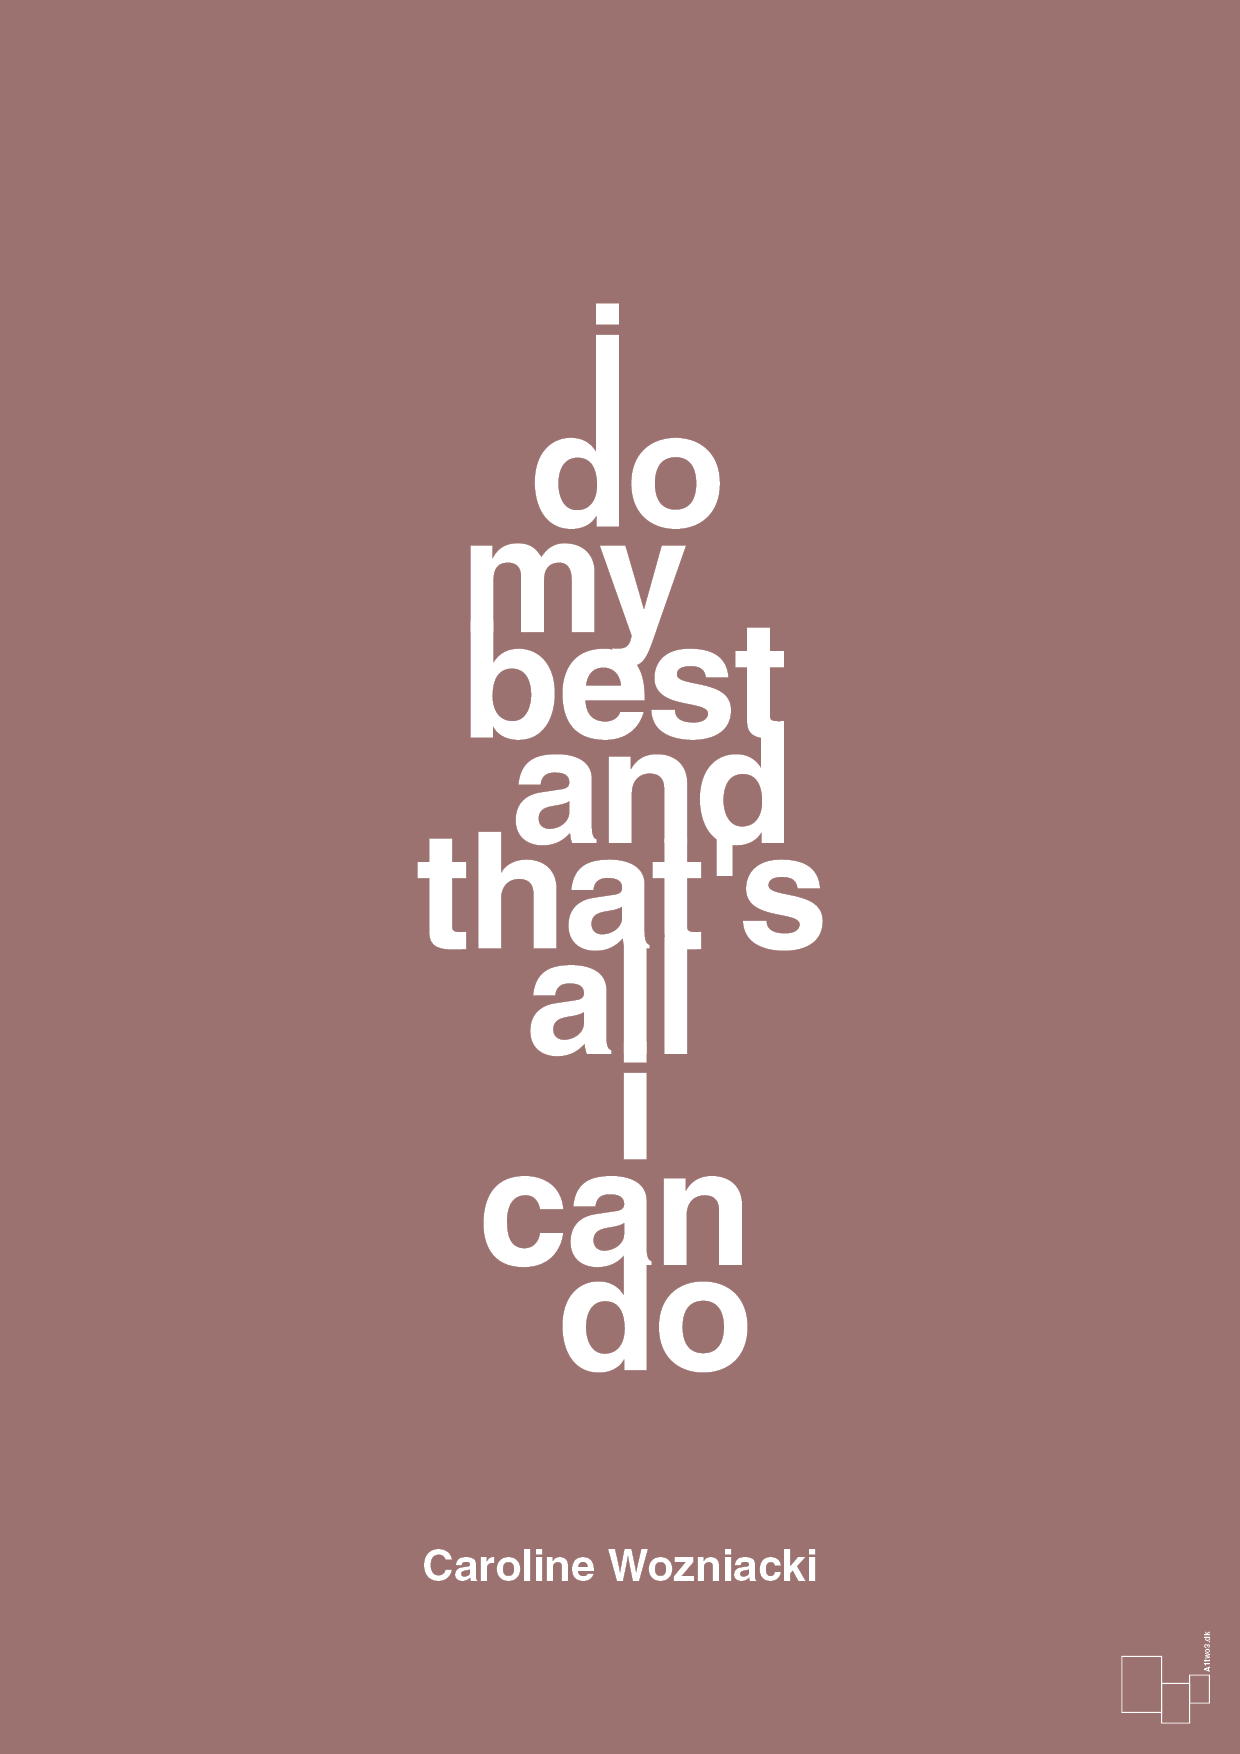 i do my best and that's all i can do - Plakat med Citater i Plum